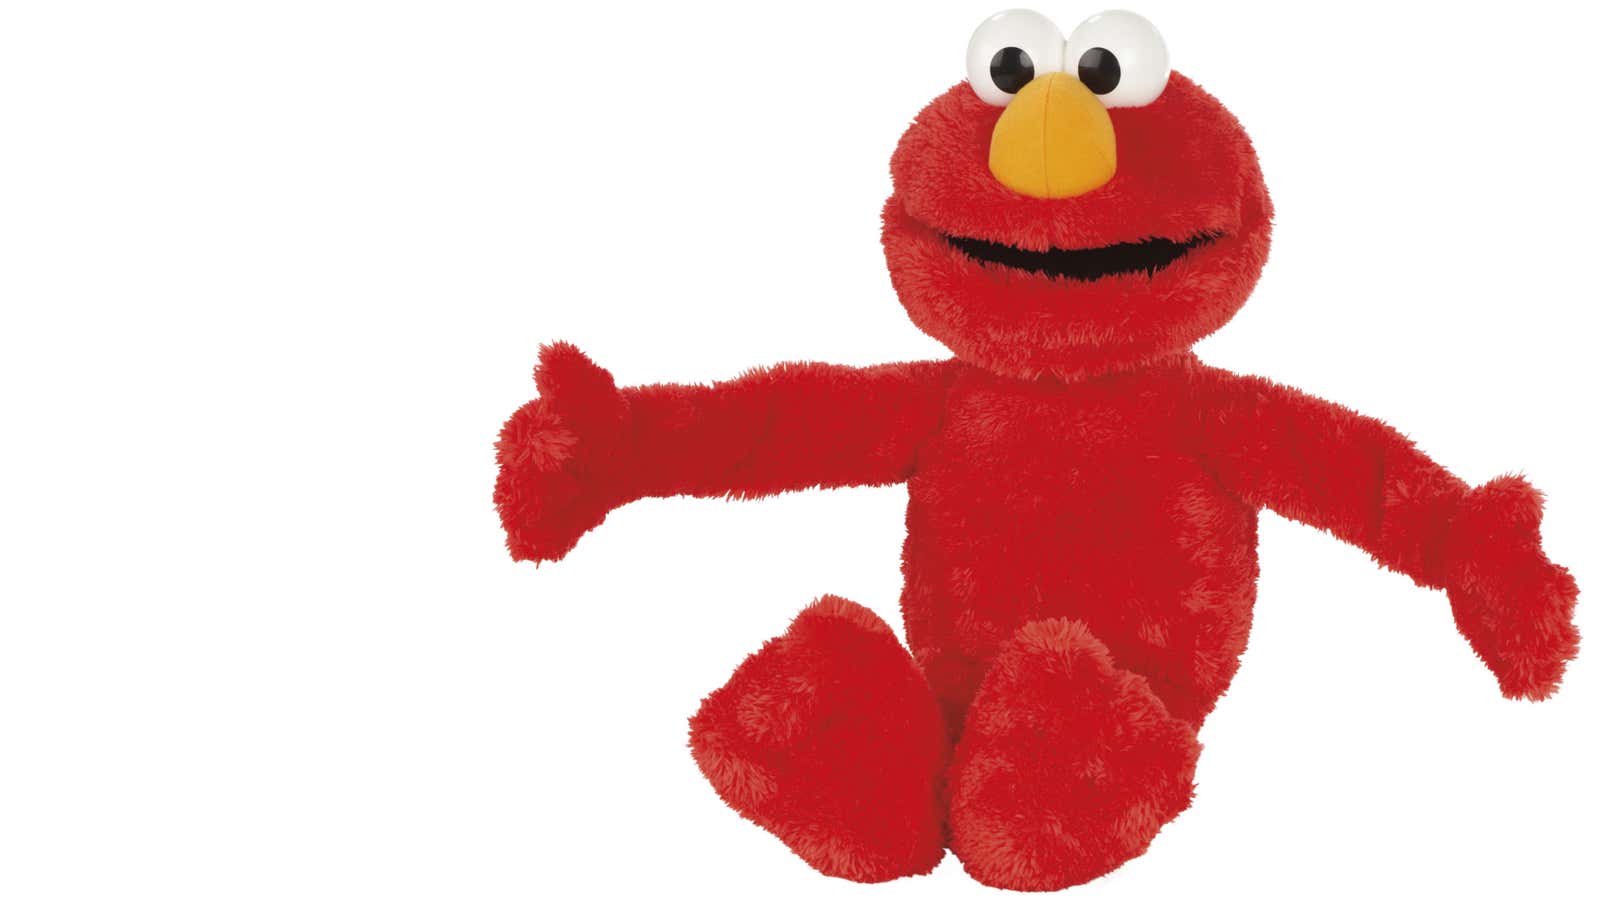 From Tickle Me Elmo to Big Hugs Elmo: nearly two decades of Christmas toy dominance